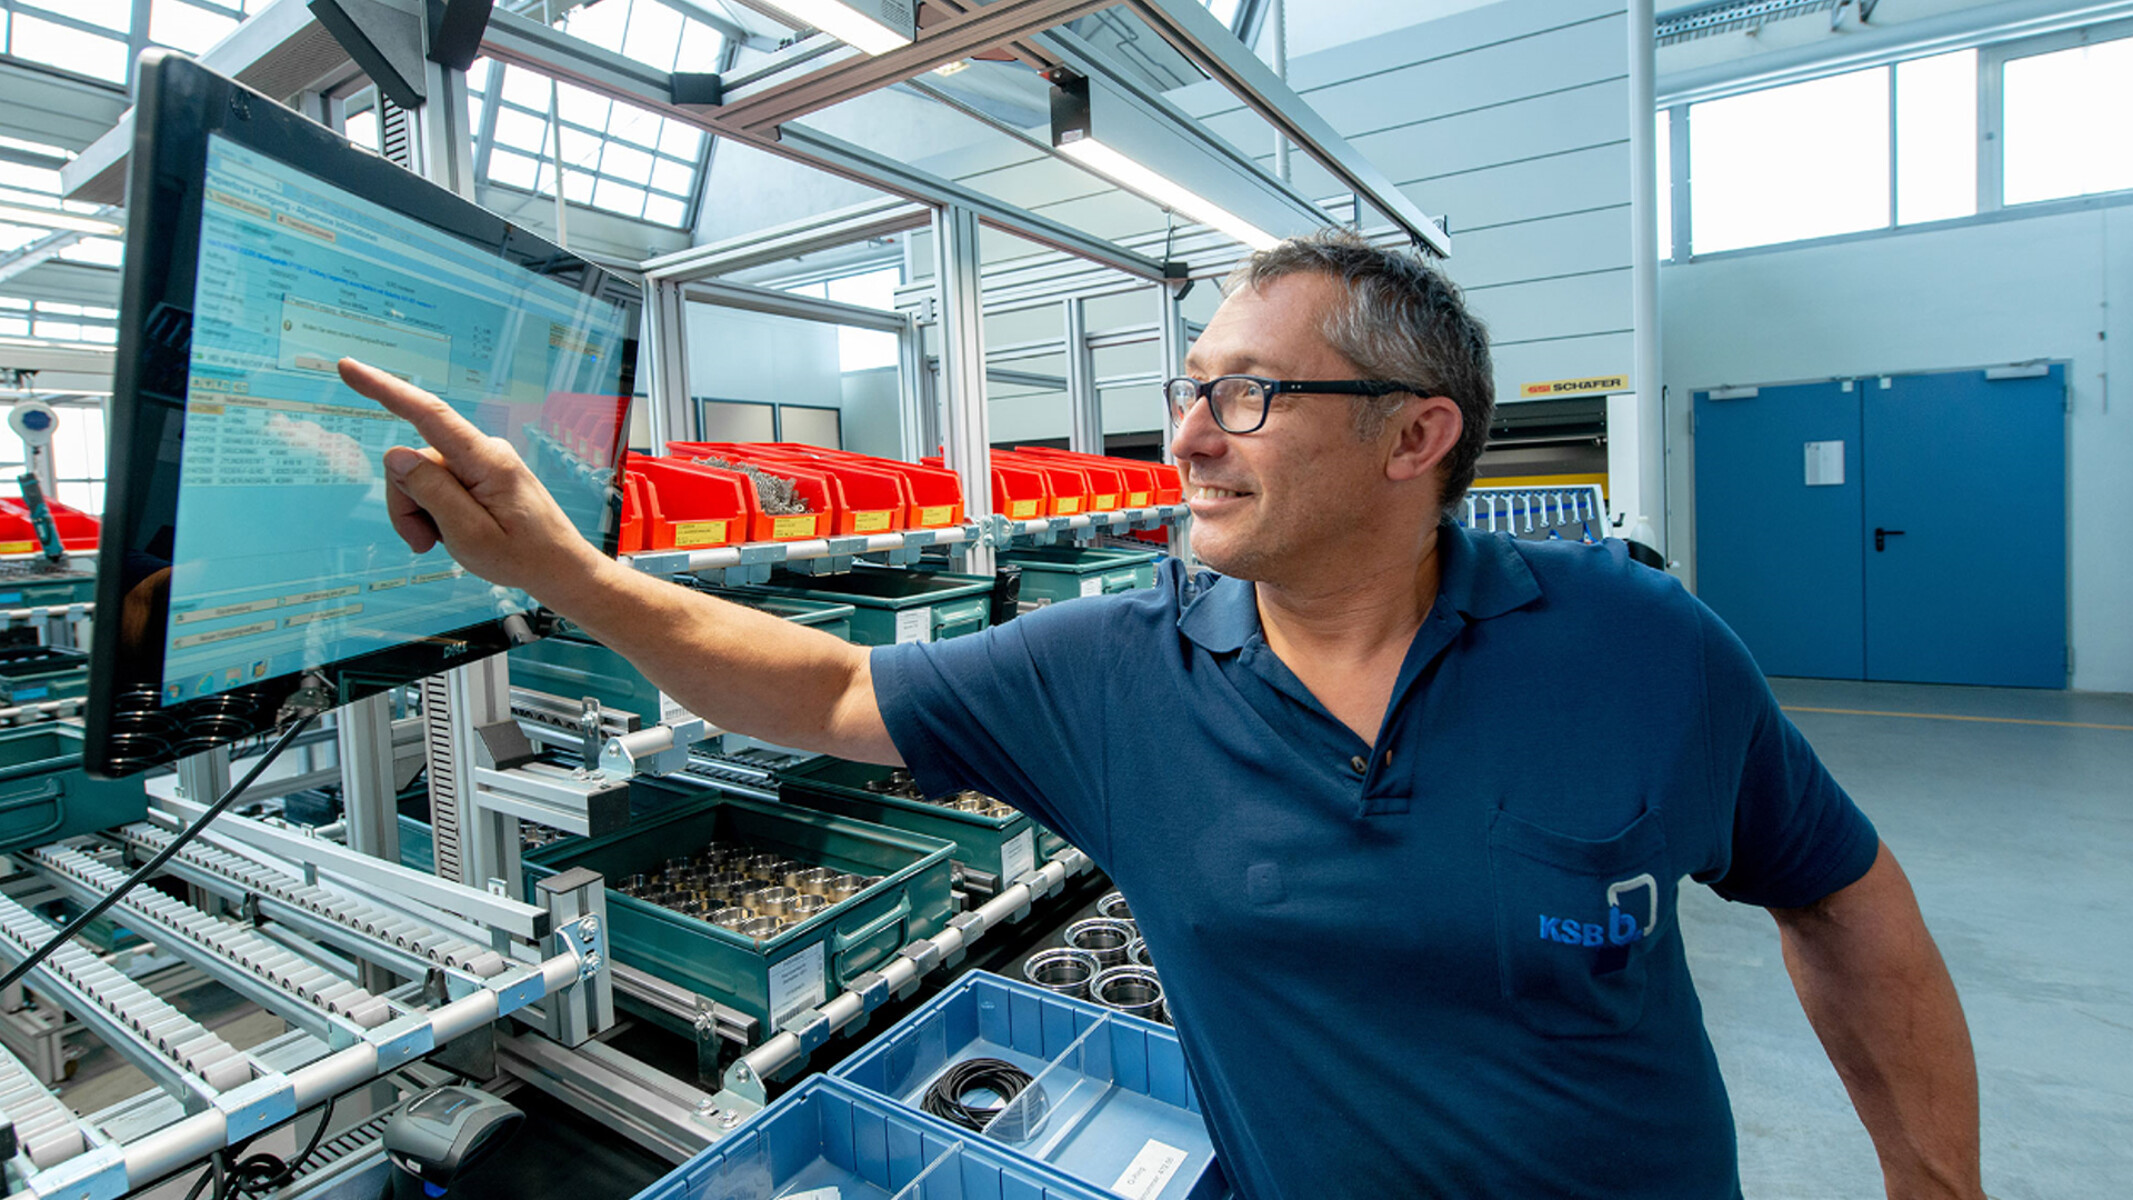 KSB, digital transparency: An engineer monitors production on a large screen